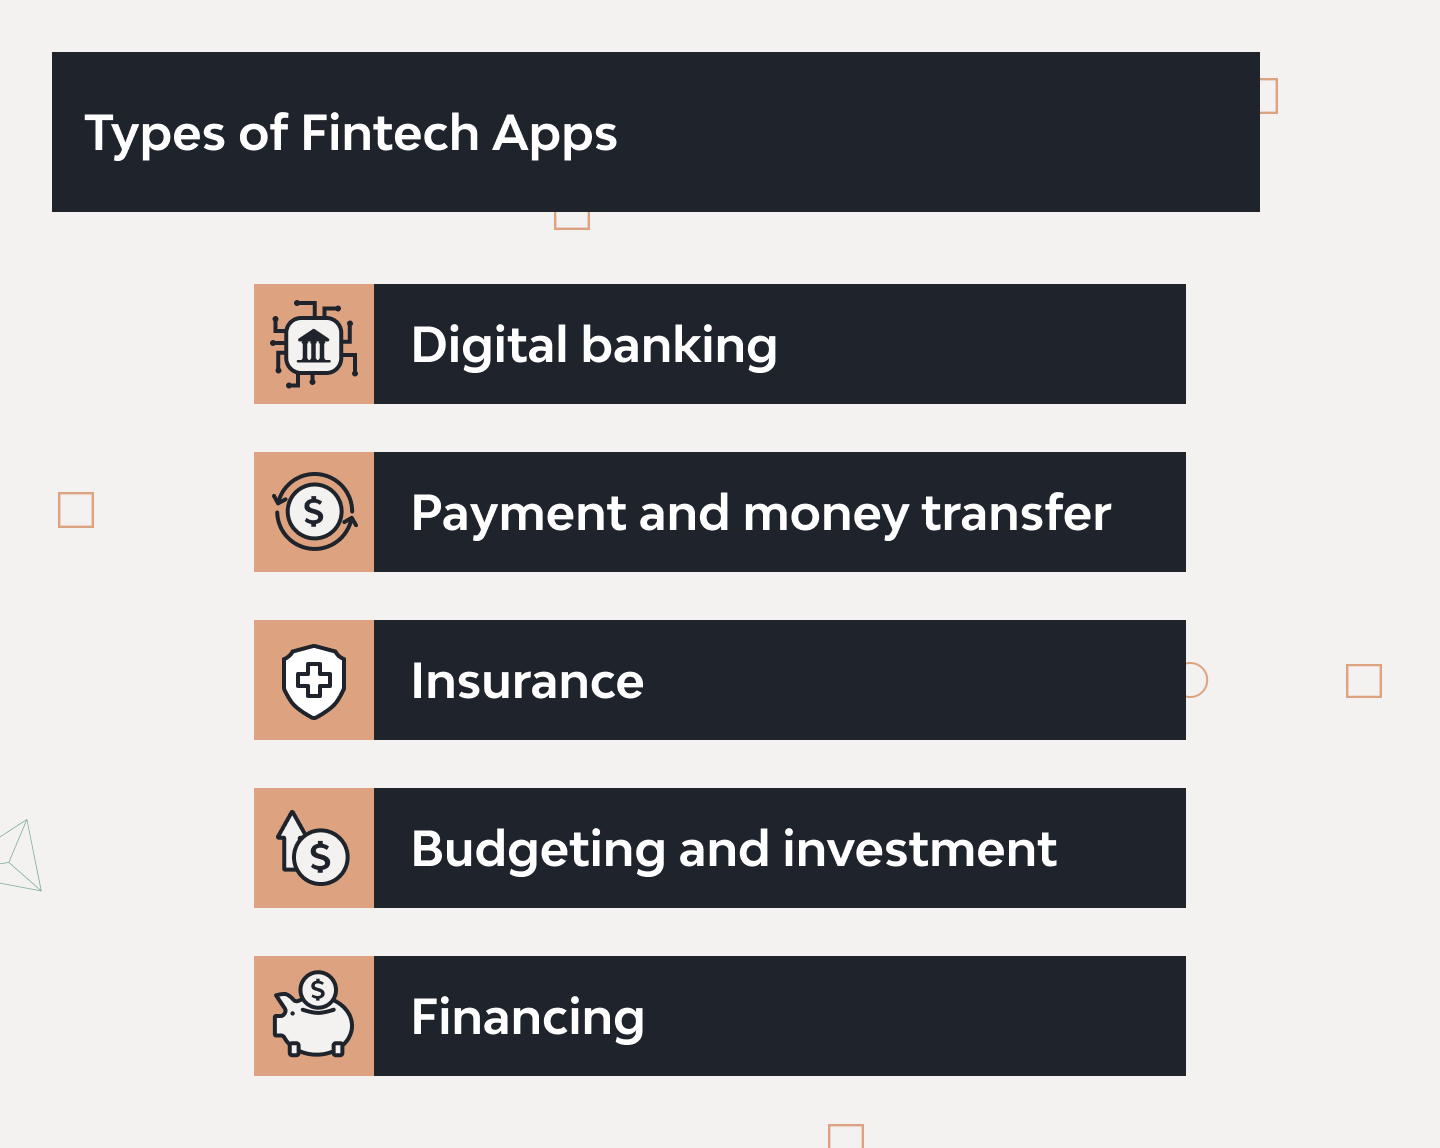 How to Build a Fintech Application: The Ultimate Guide 2